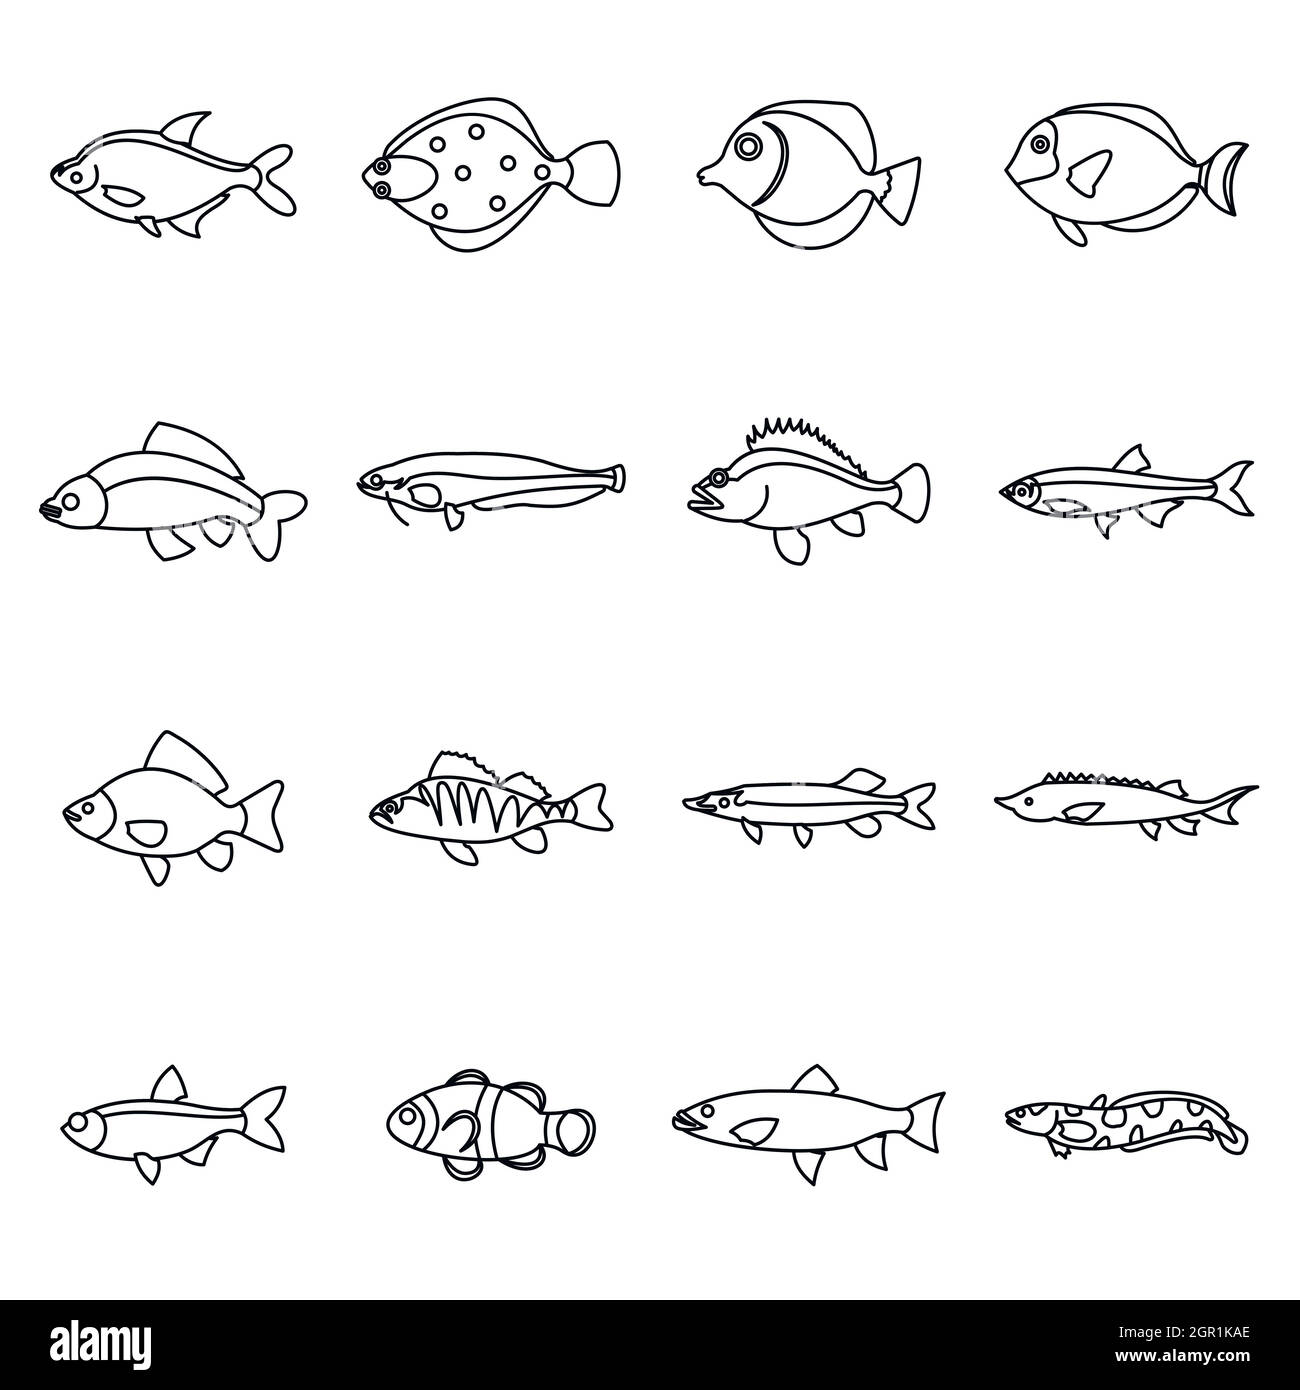 Small Fish Vector Art Icons and Graphics for Free Download